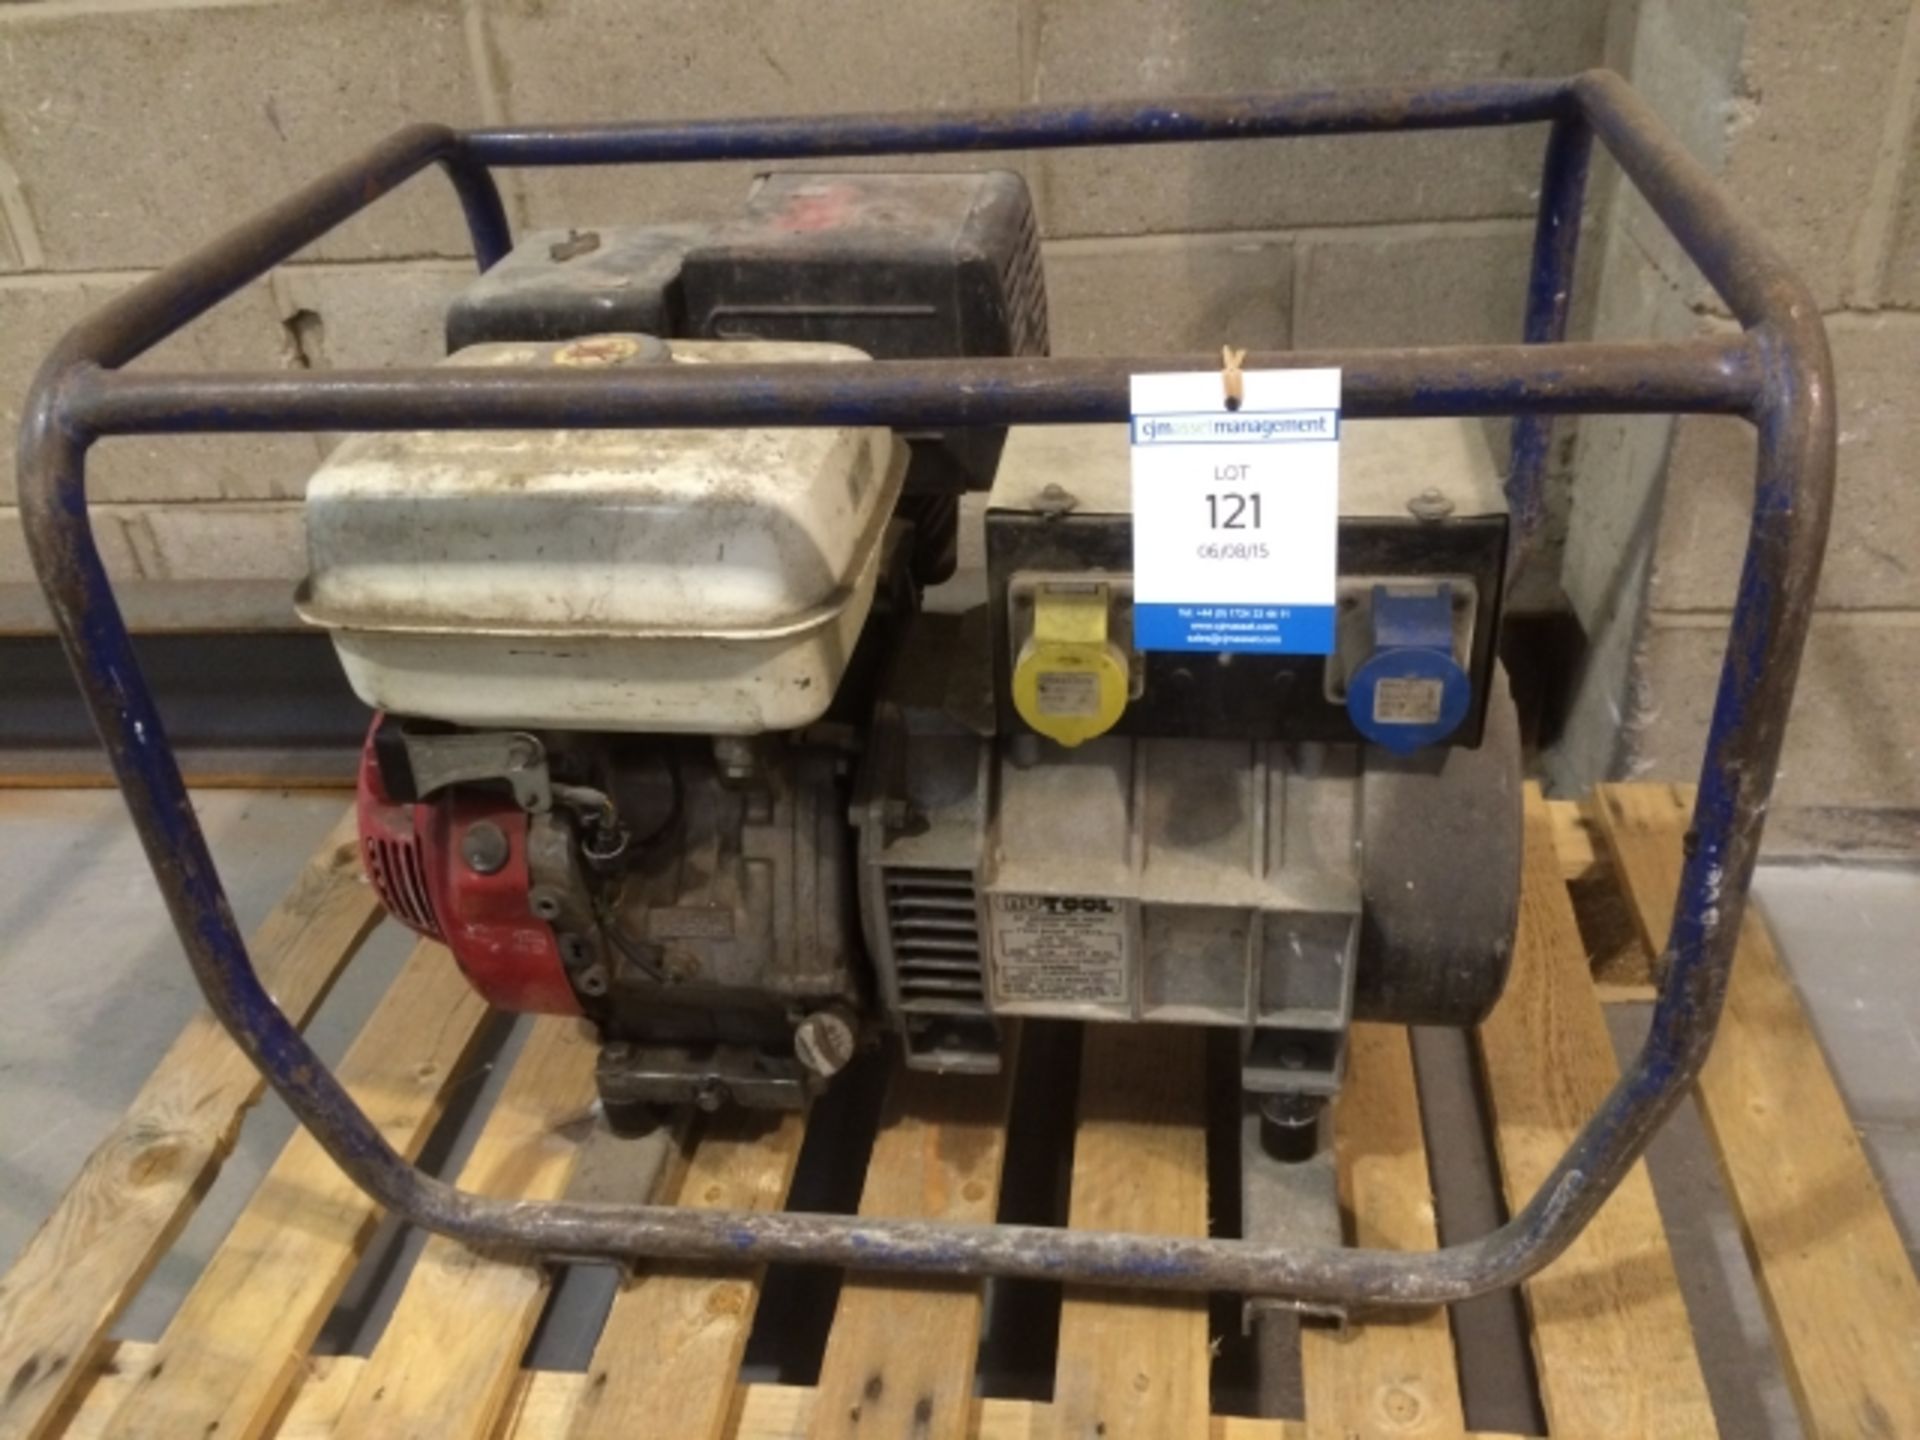 * Skid Mounted Honda GX240 8HP Engined Generator with 3 outlets. This lot is located at the former